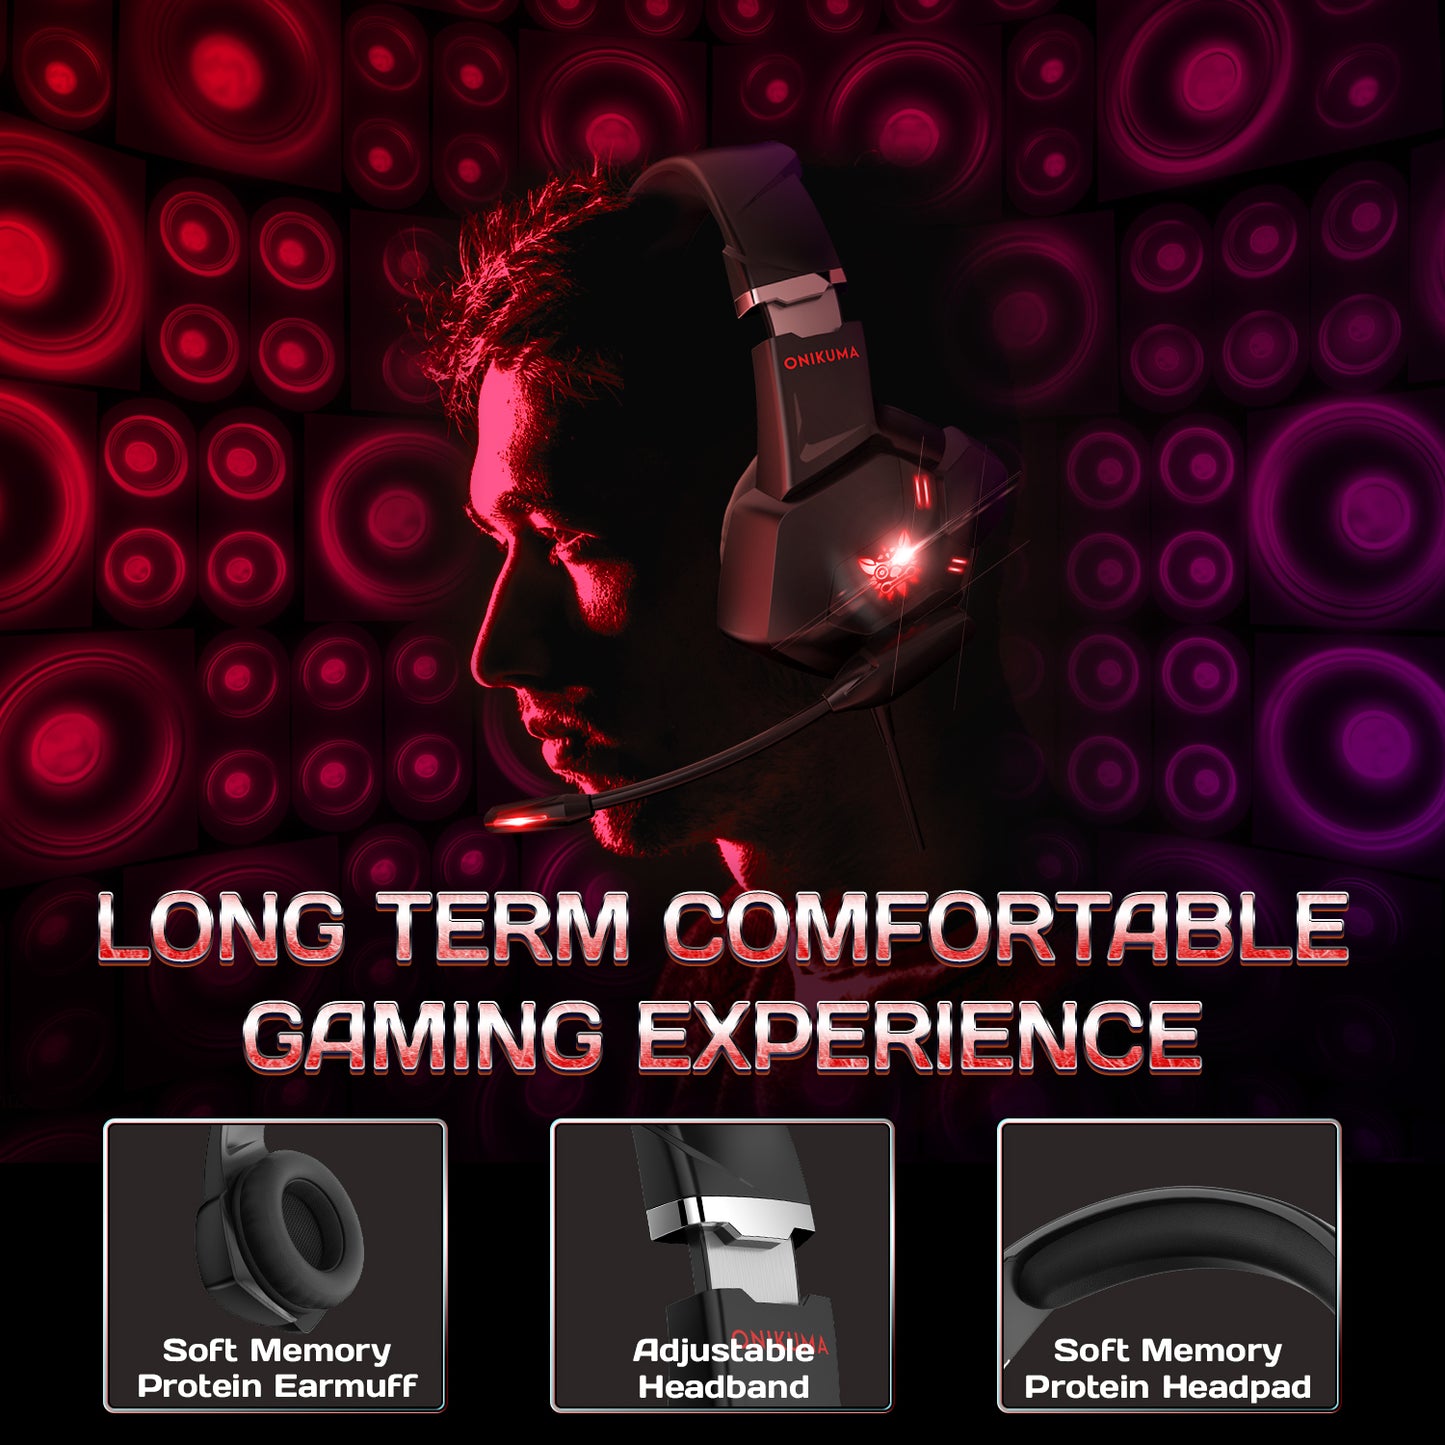 ONIKUMA K11 PS4 Gaming Headset with Mic and LED Light